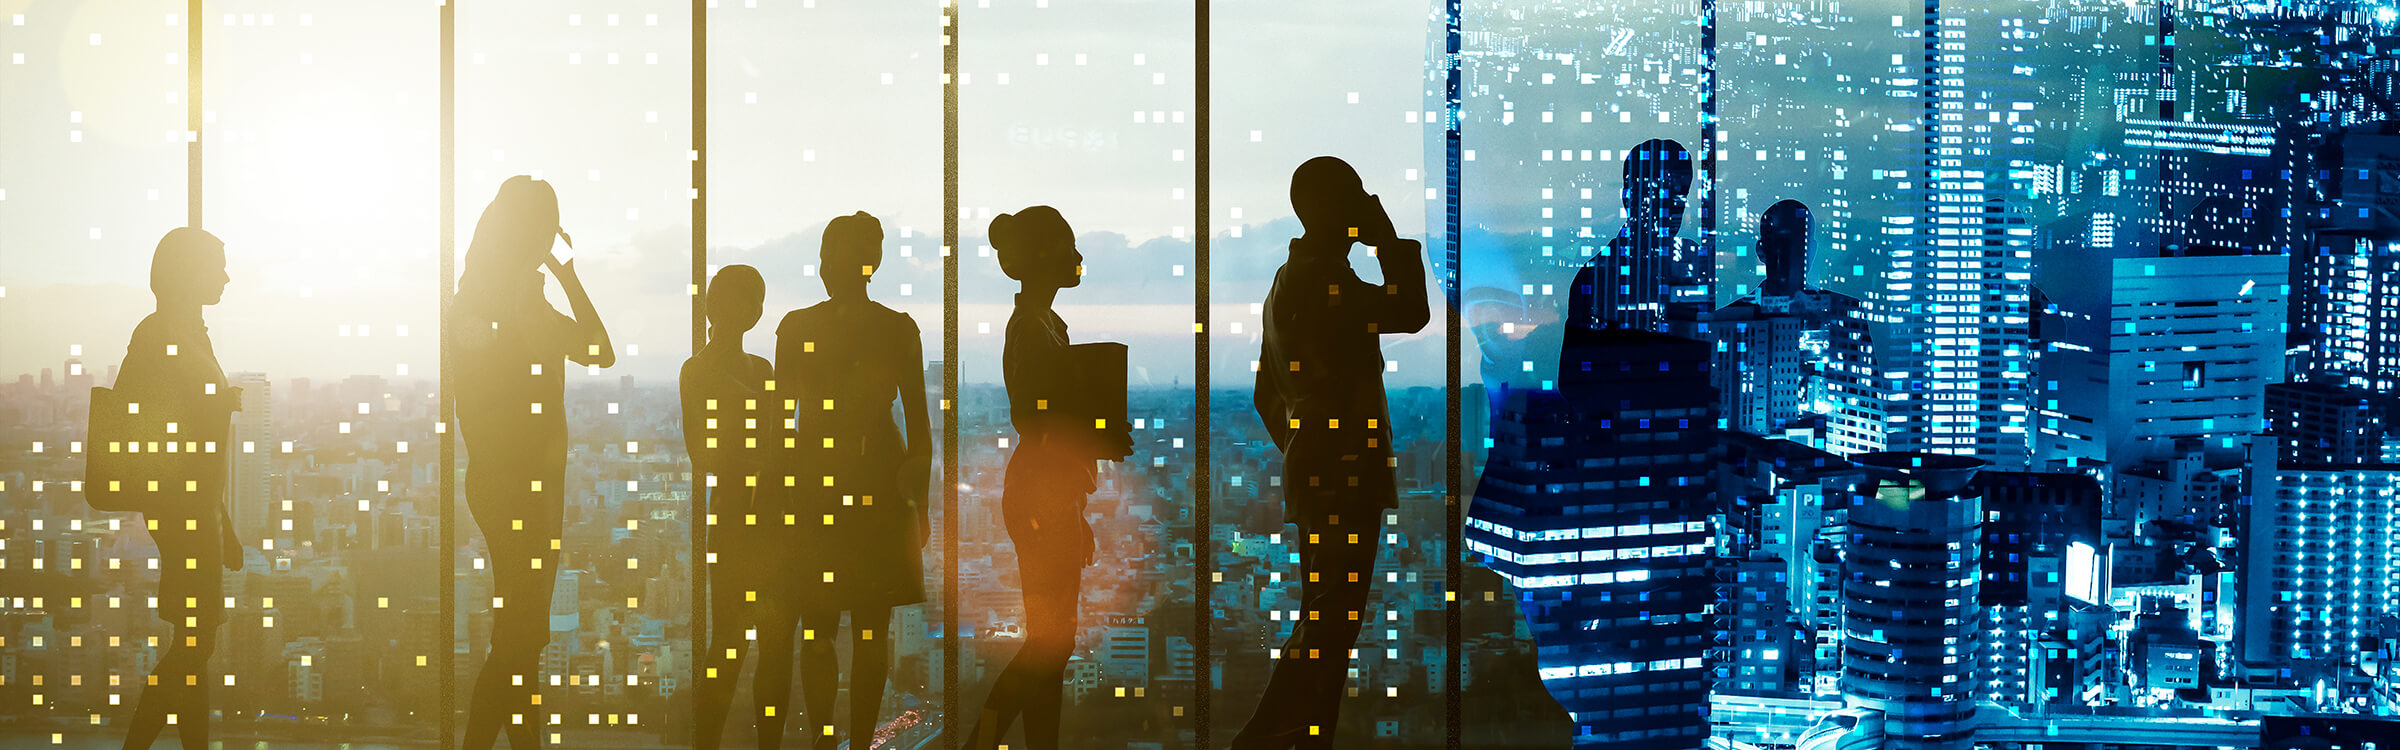 A group of businesspeople silhouetted against a modern office background.